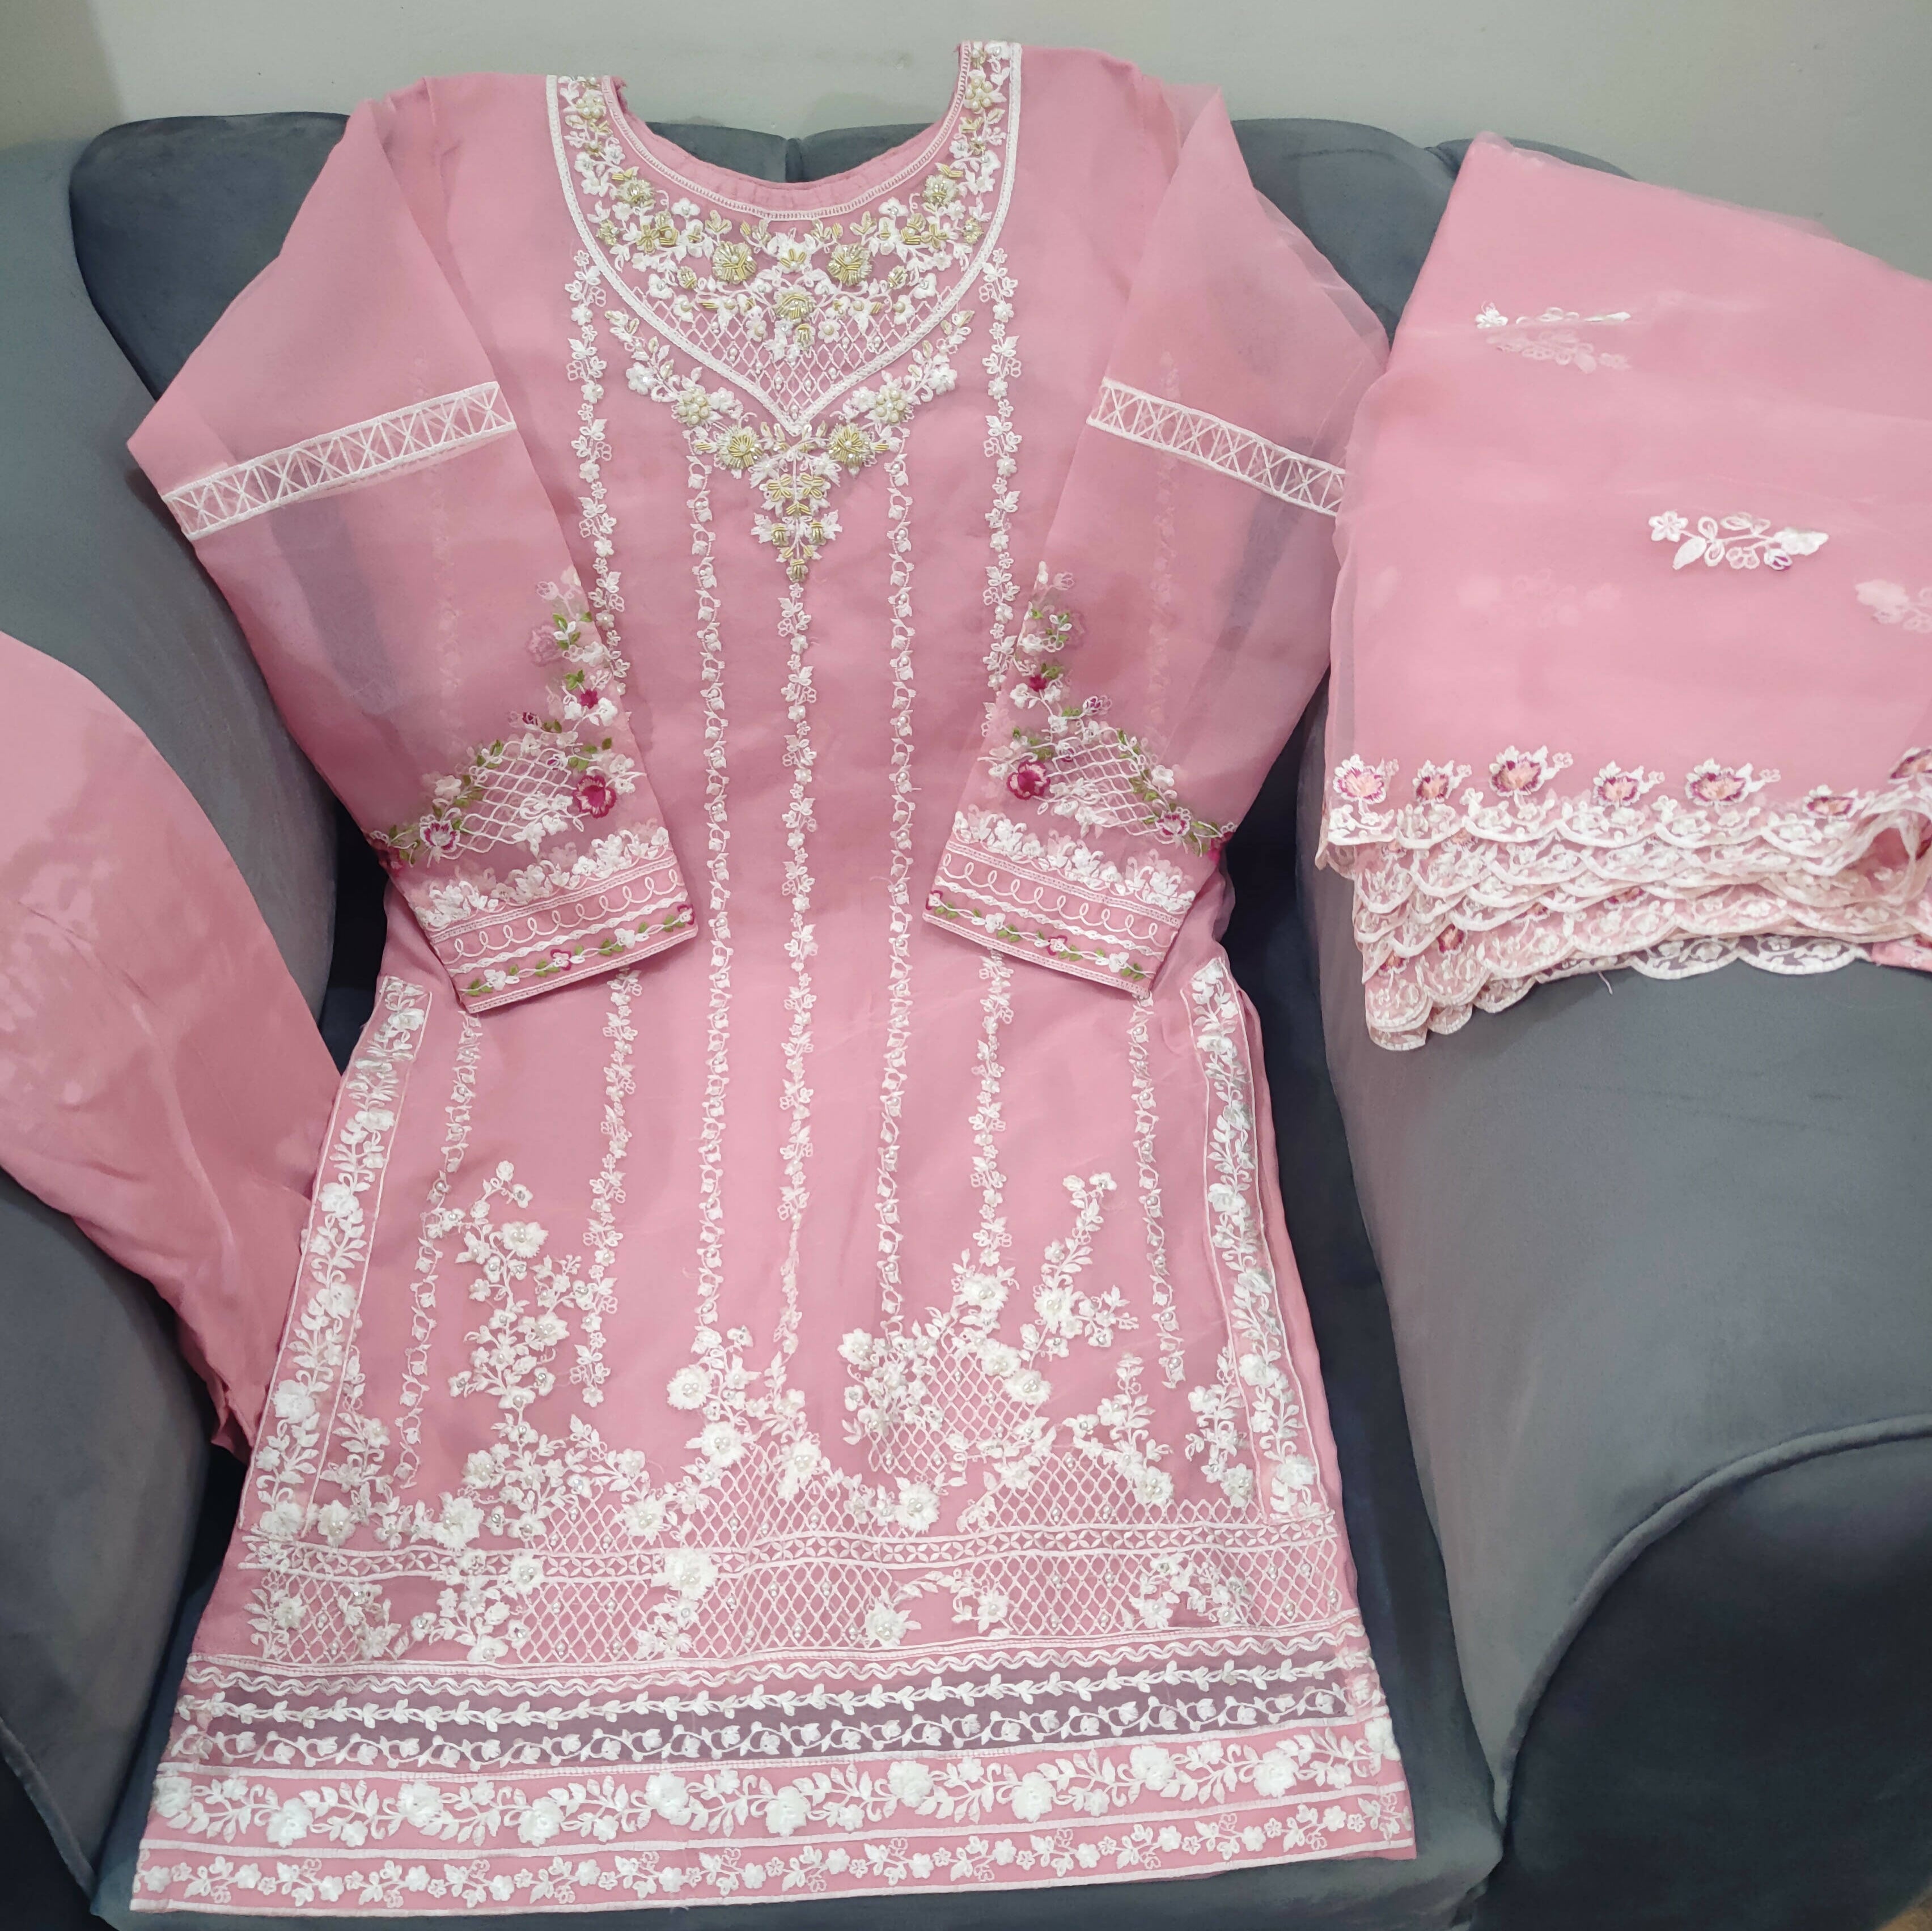 Agha Noor | Pink Gold Stitched 4 Pc Pure Organza Shirt With Dupatta | Women Formals | Medium | New